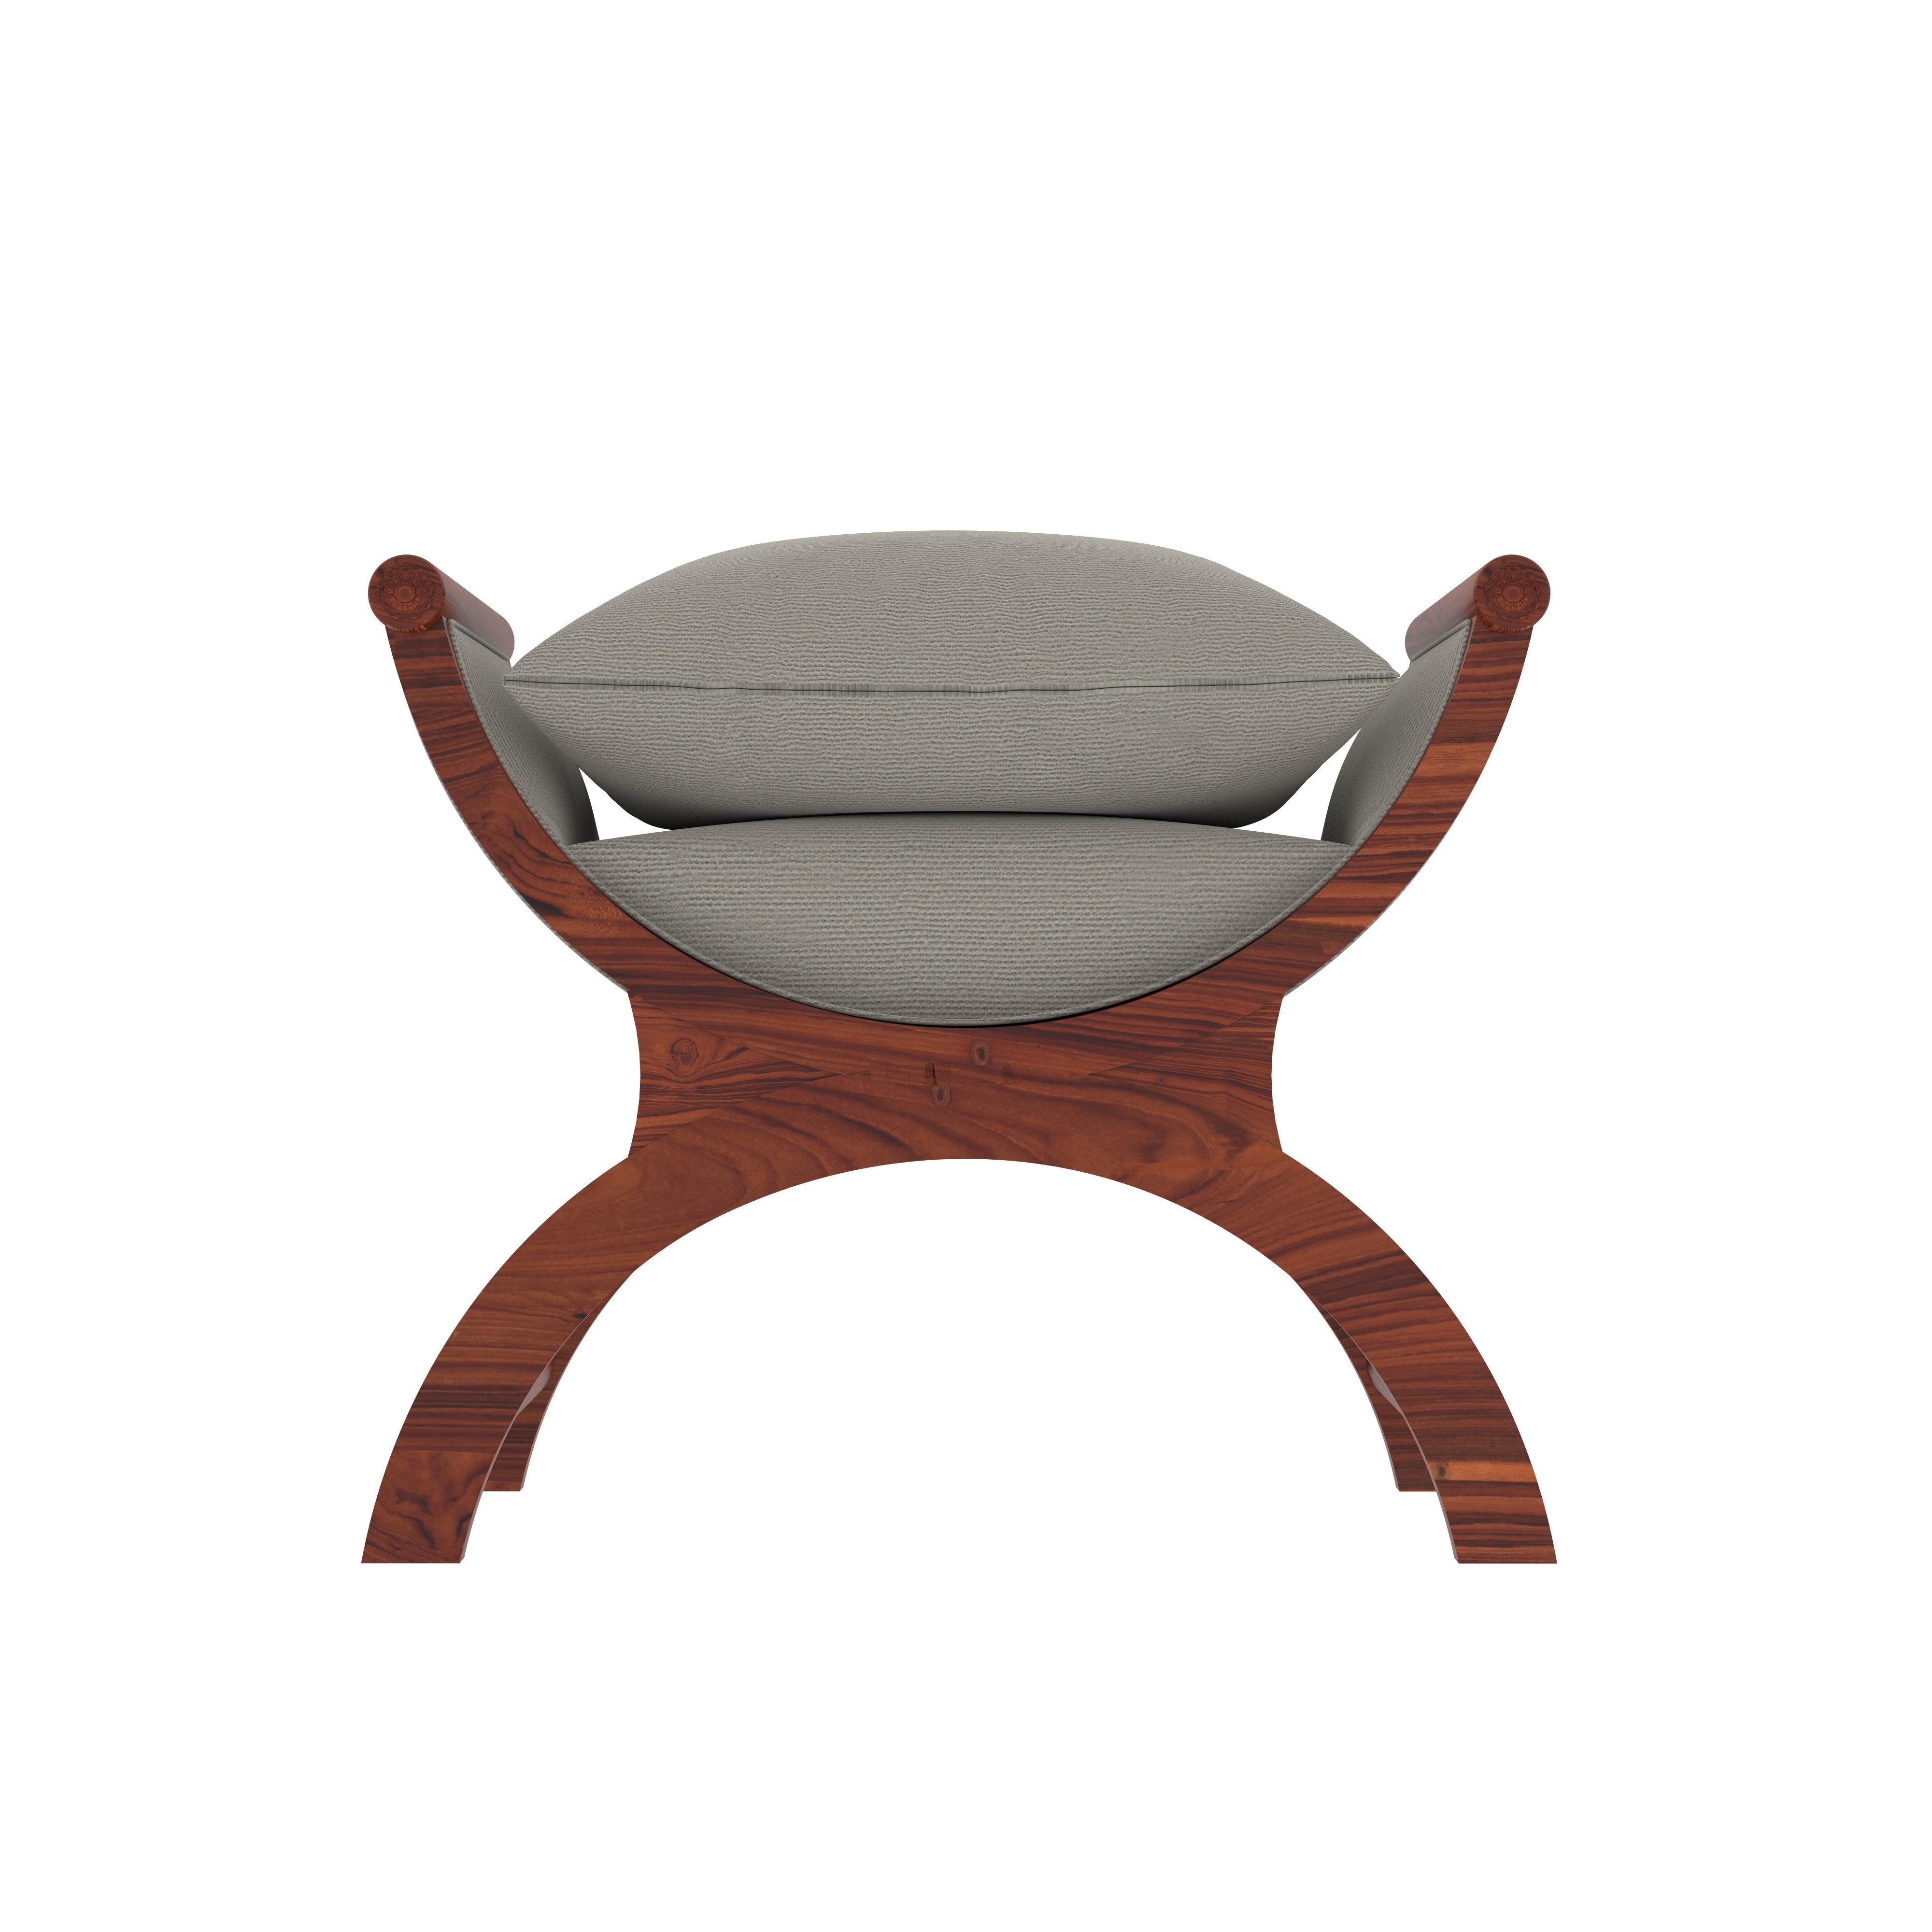 Decorative Stool with Upholstery, One-Seater Design Stool